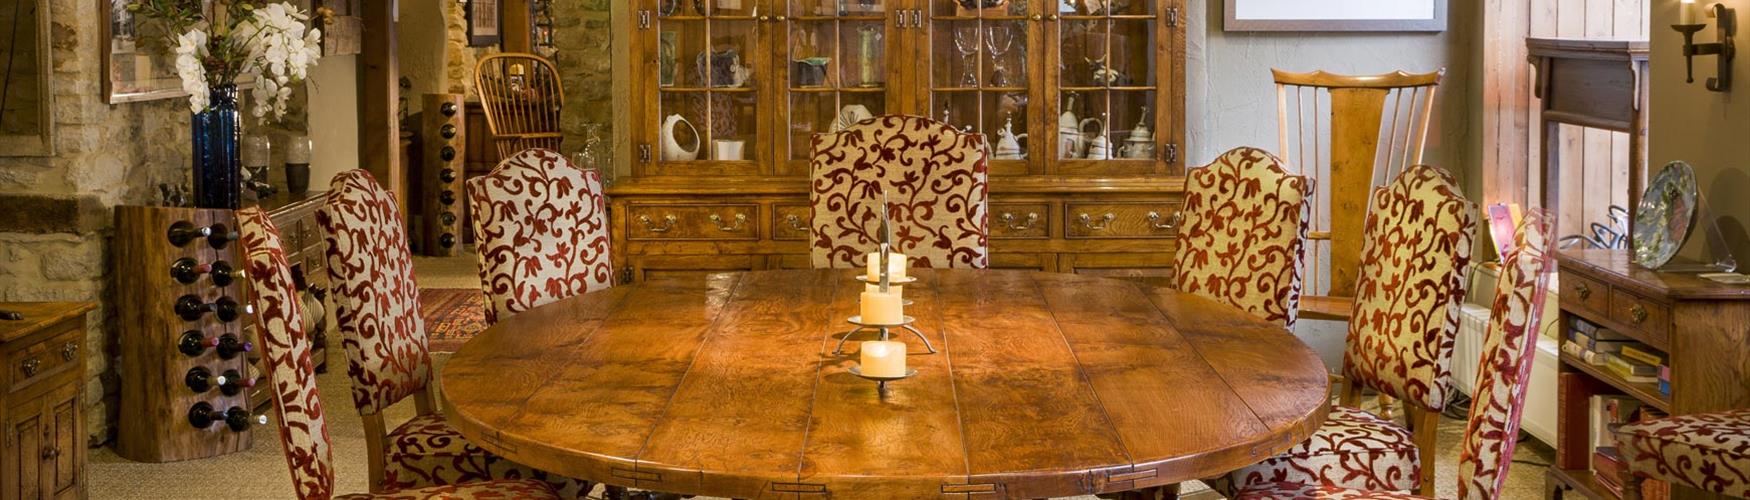 Art and antiques in the Cotswolds - Real Wood Furniture Company dining table